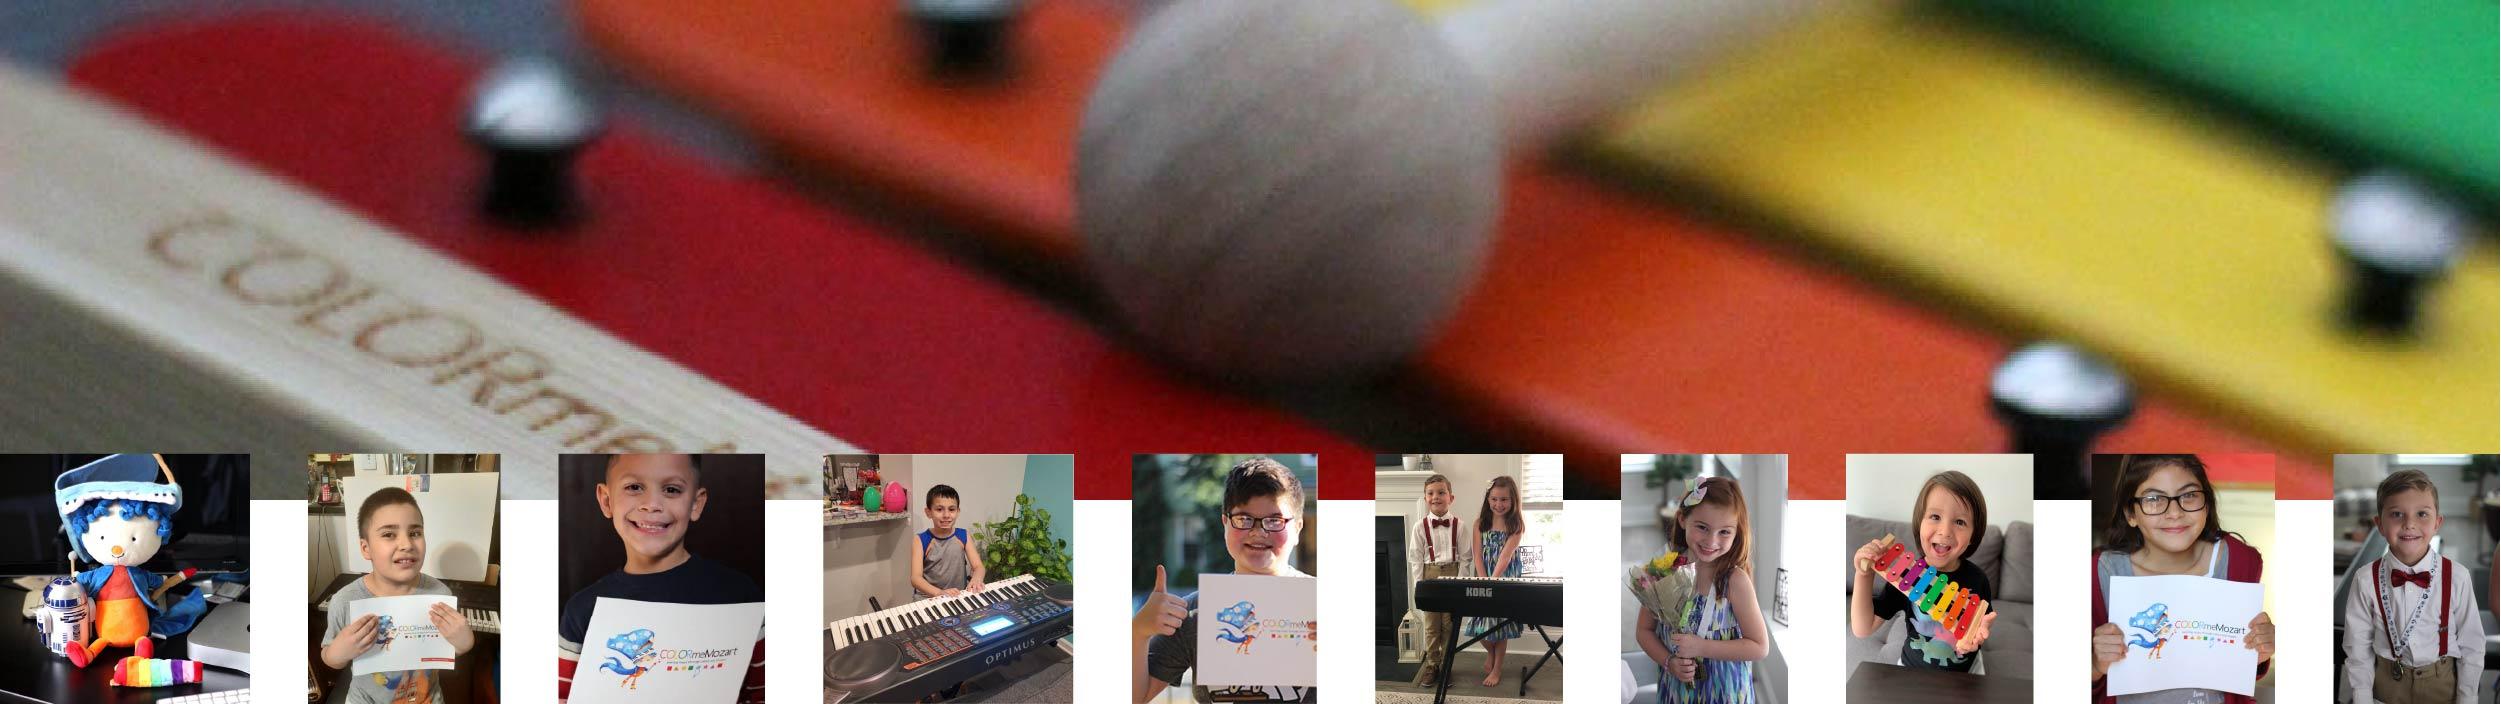 Xylophone and Students